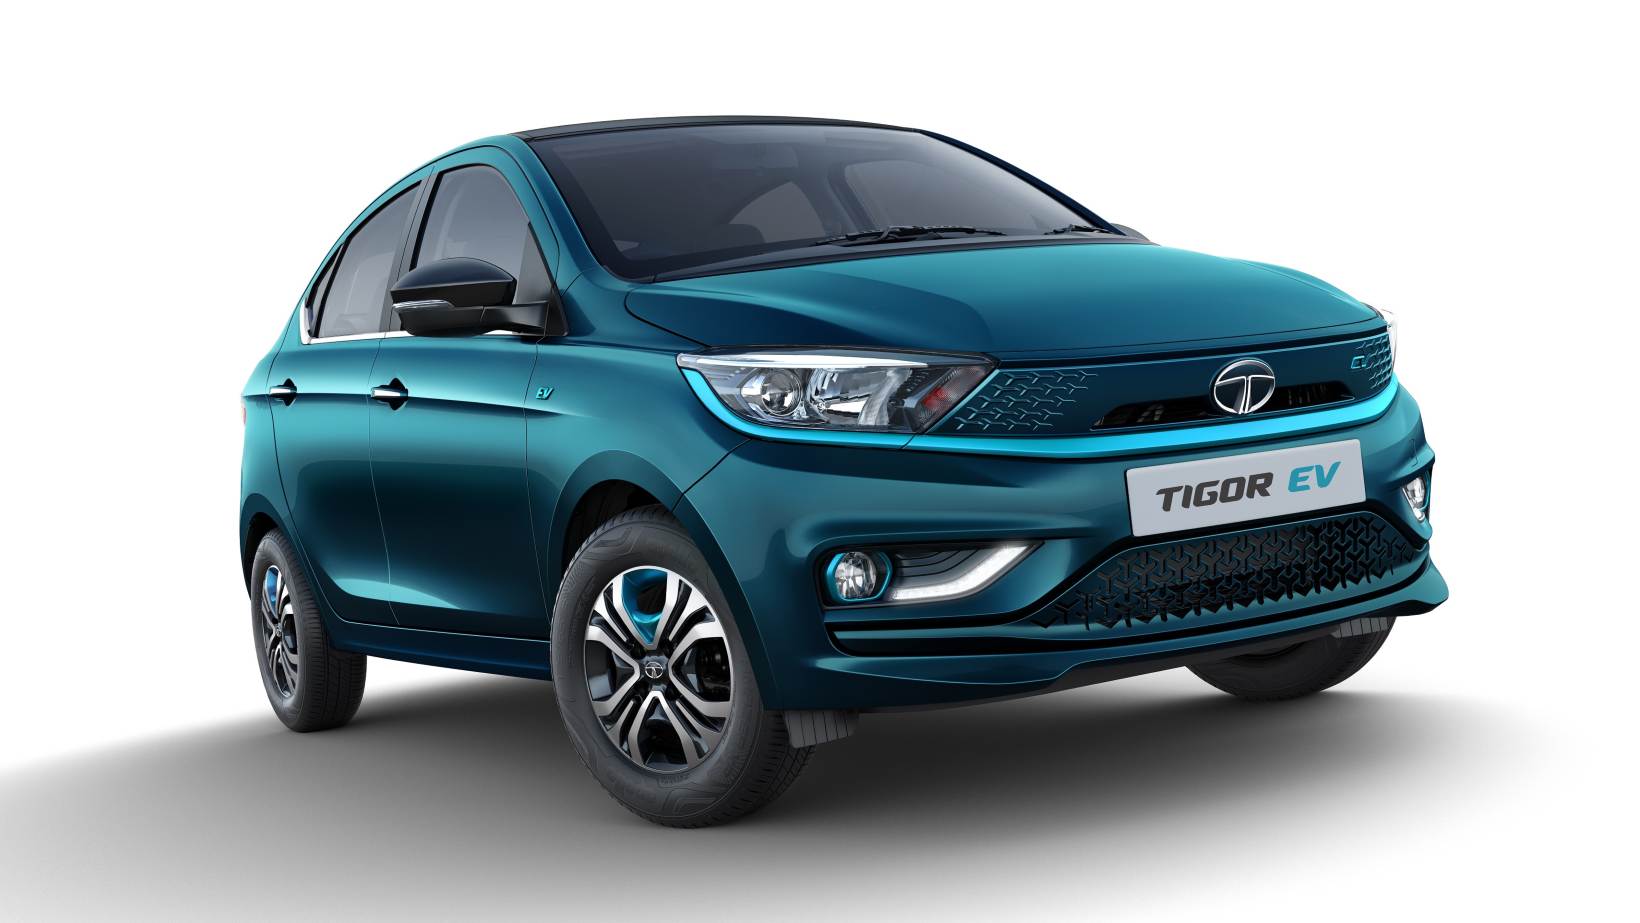 You are currently viewing Tata Tigor EV Ziptron revealed ahead of 31 August launch, set to be India’s most affordable electric car- Technology News, FP